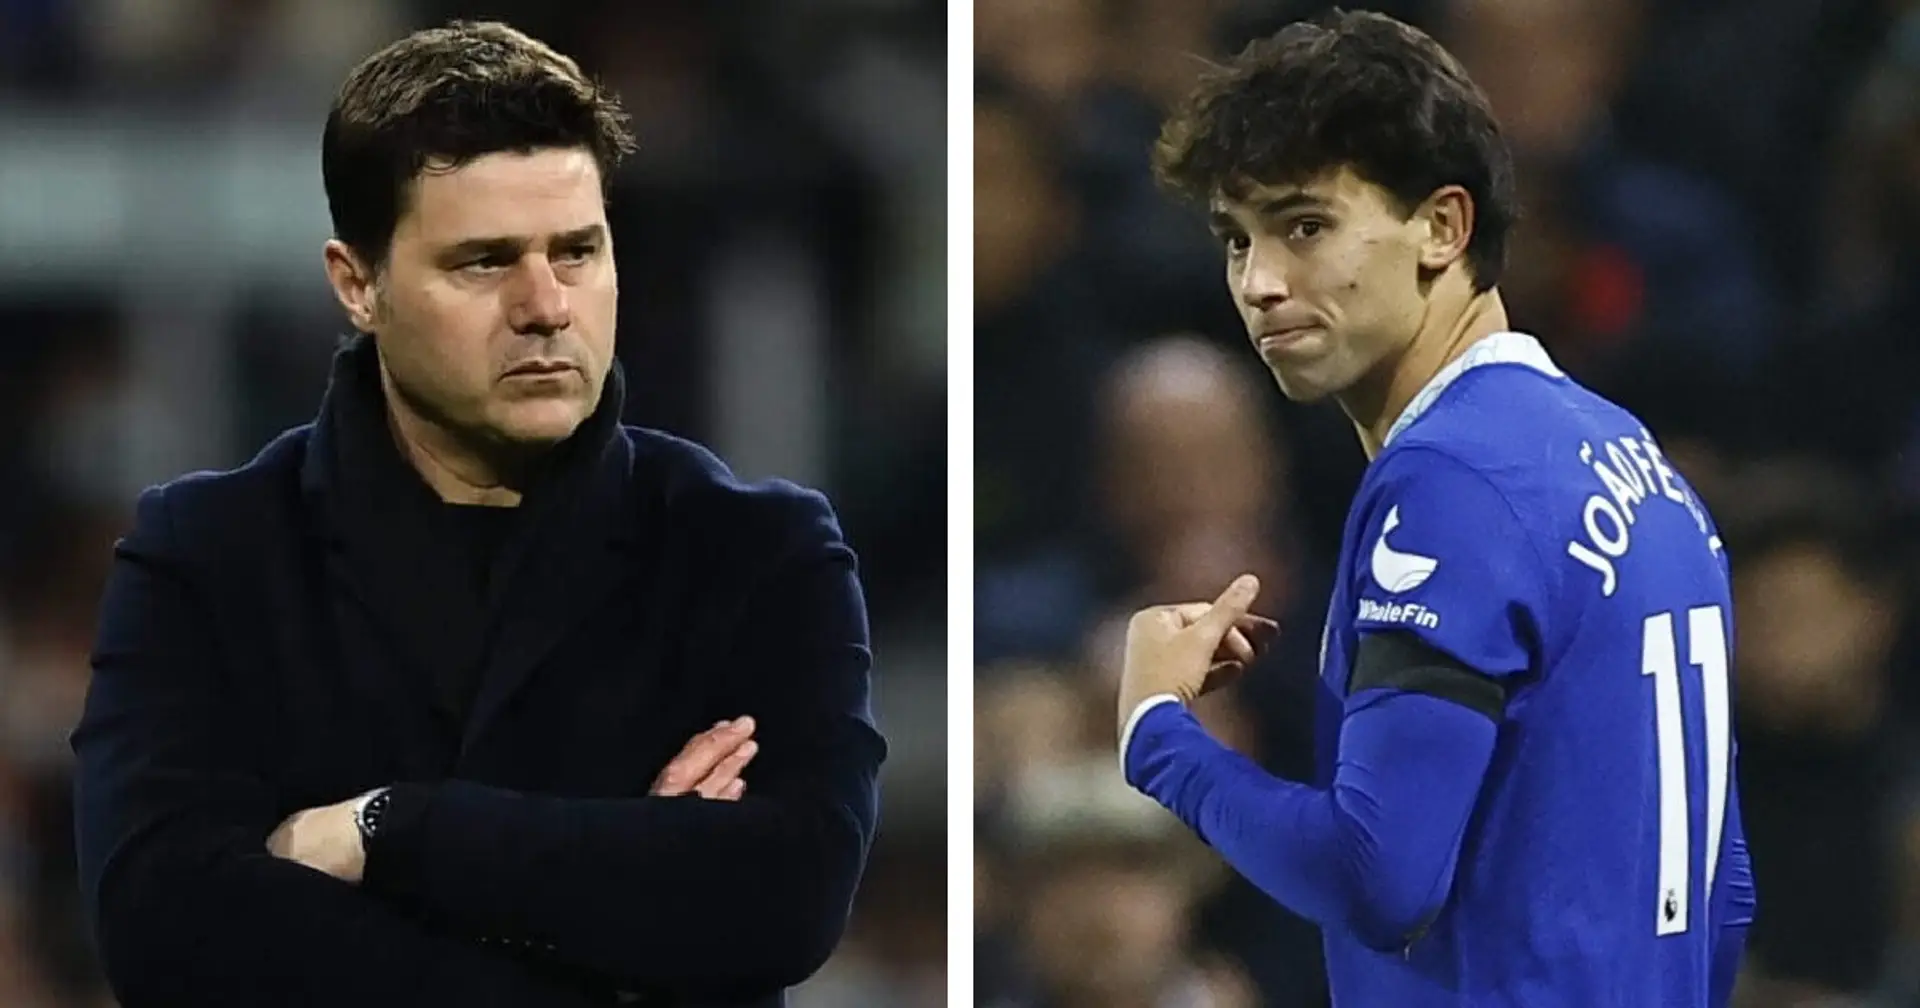 Atletico president confirms Pochettino does not have Felix in his plans, will return to Spain 